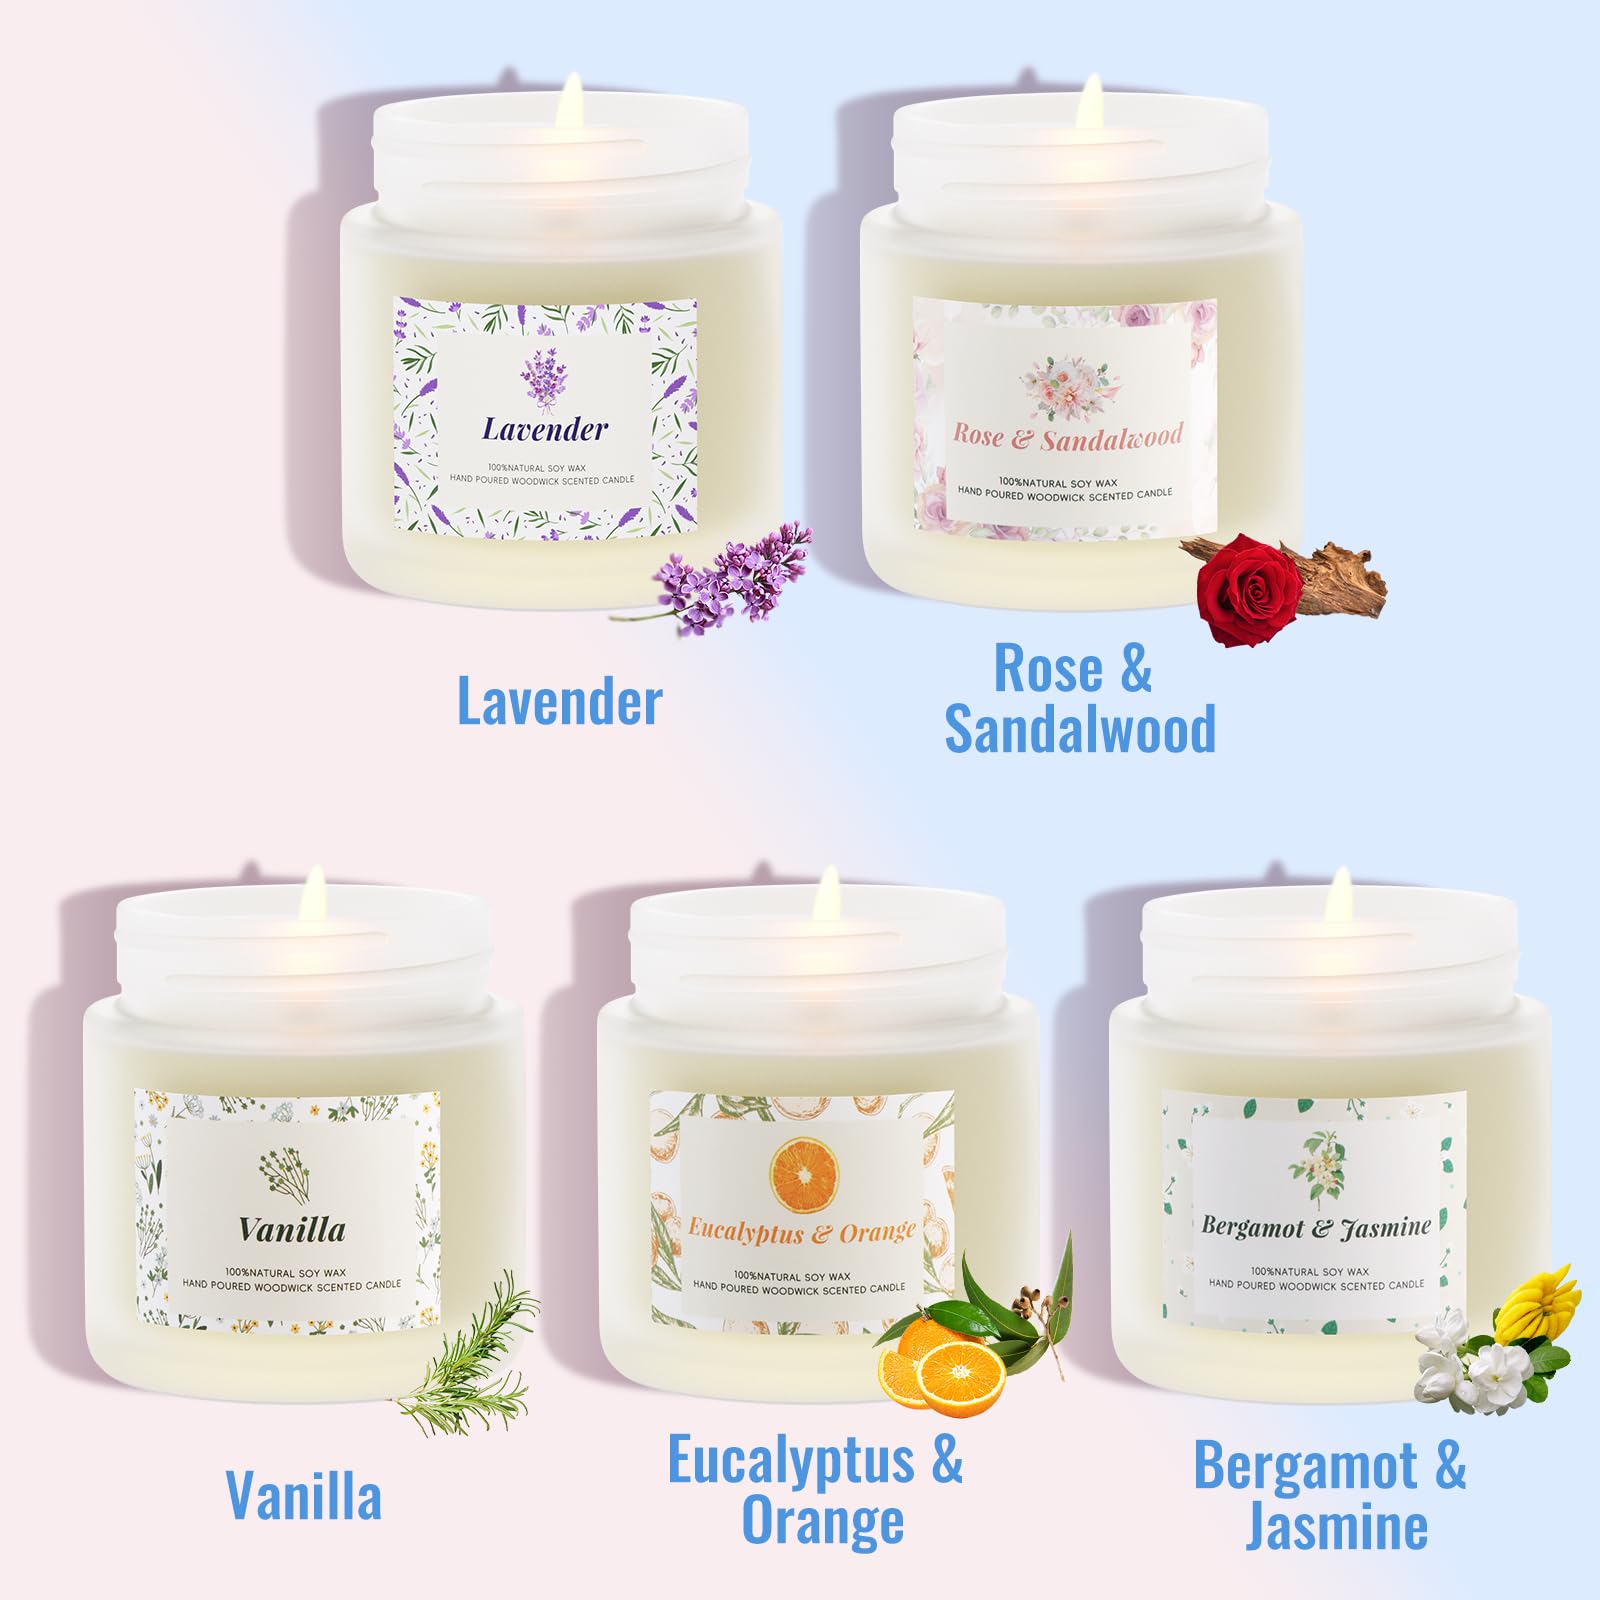 BlissfulOasis Scented Candles, Nest Candles, Long-Lasting Candles for Home Scented, 5 Pack Scented Candles, Natural Soy Wax & 8% Essential Oils, Candle Gift Set for Birthday, Christmas, Festival